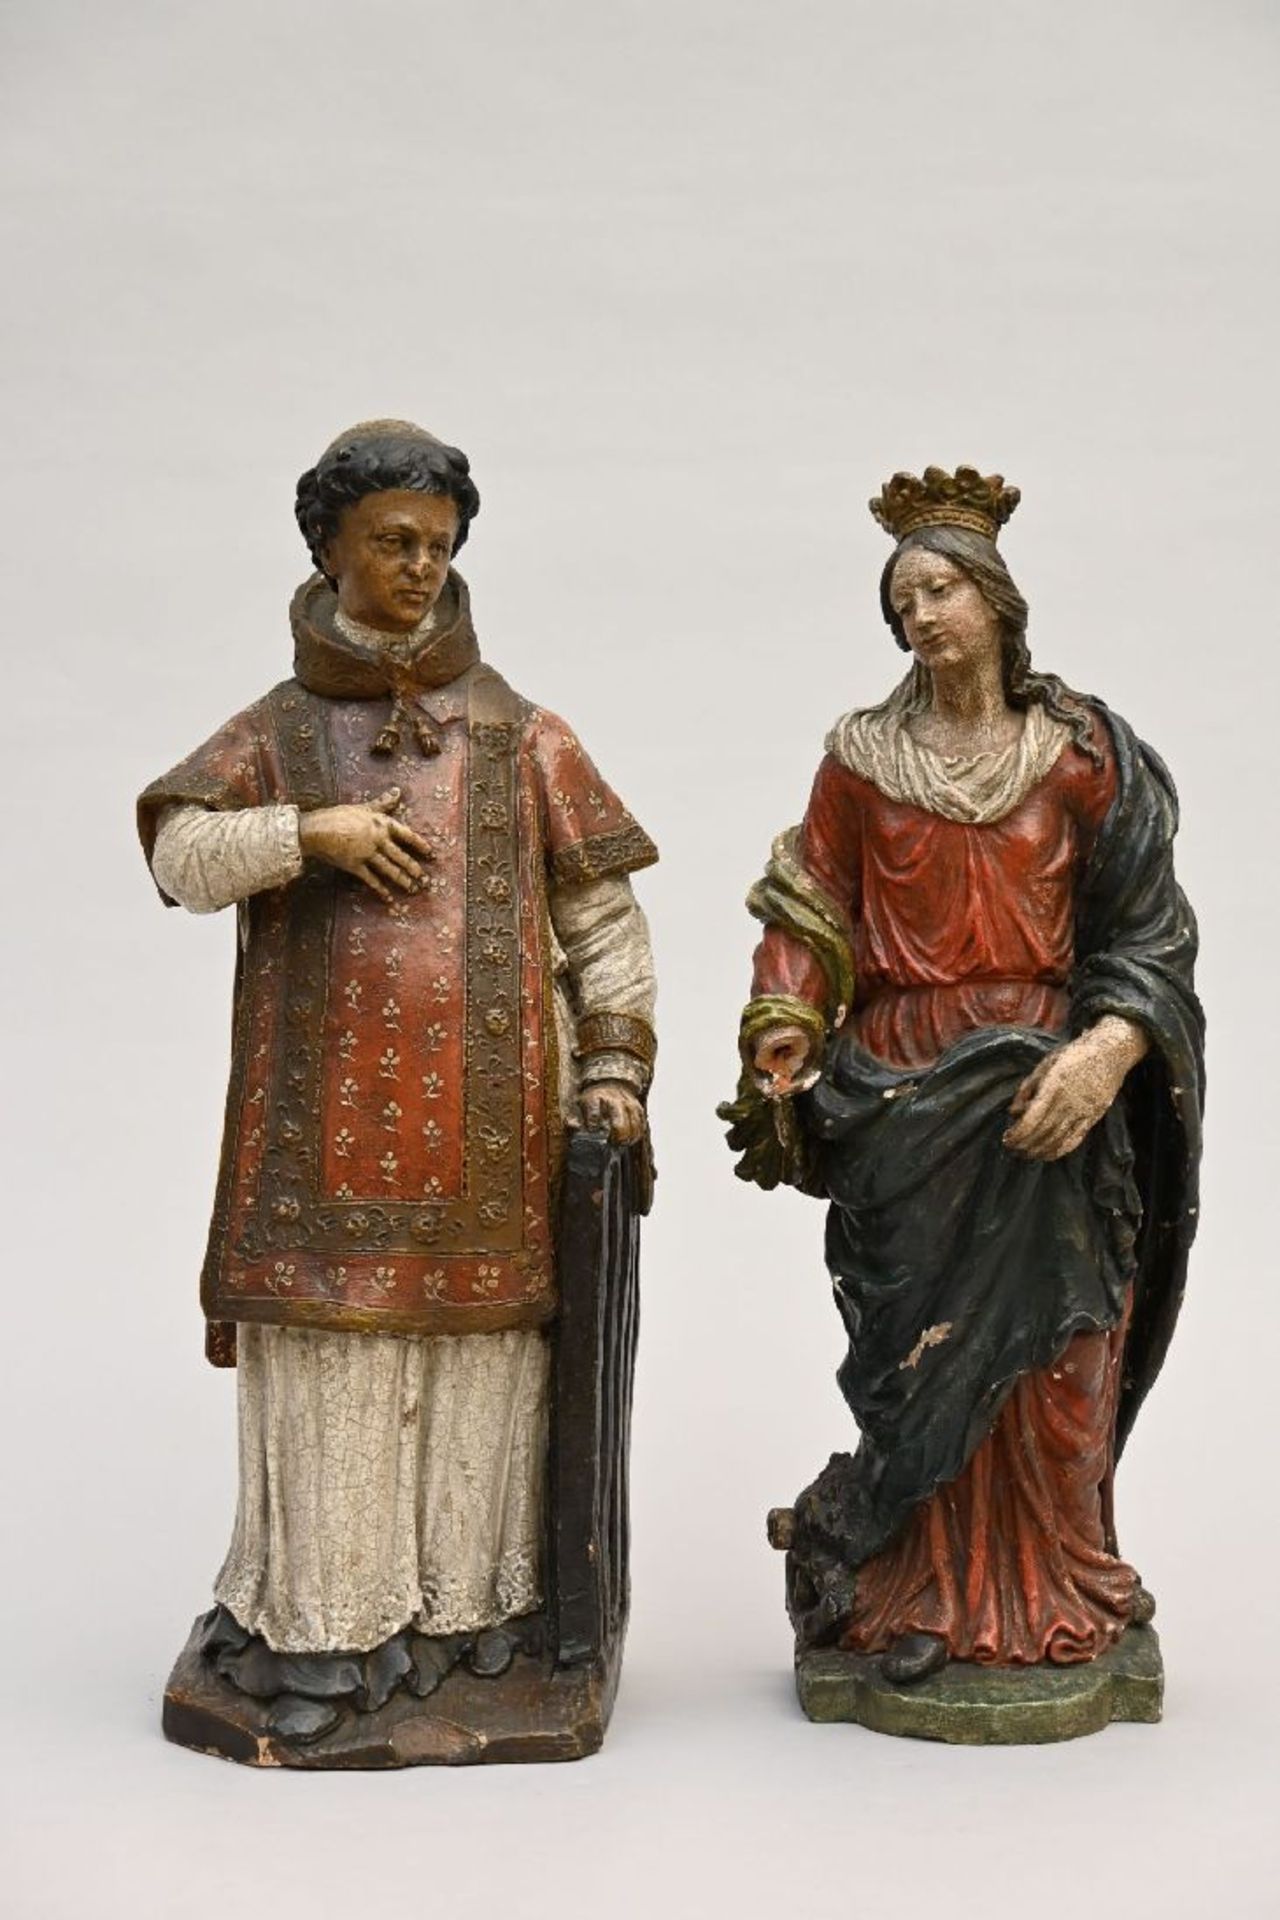 Two terracotta statues of saints, 17th - 18th century